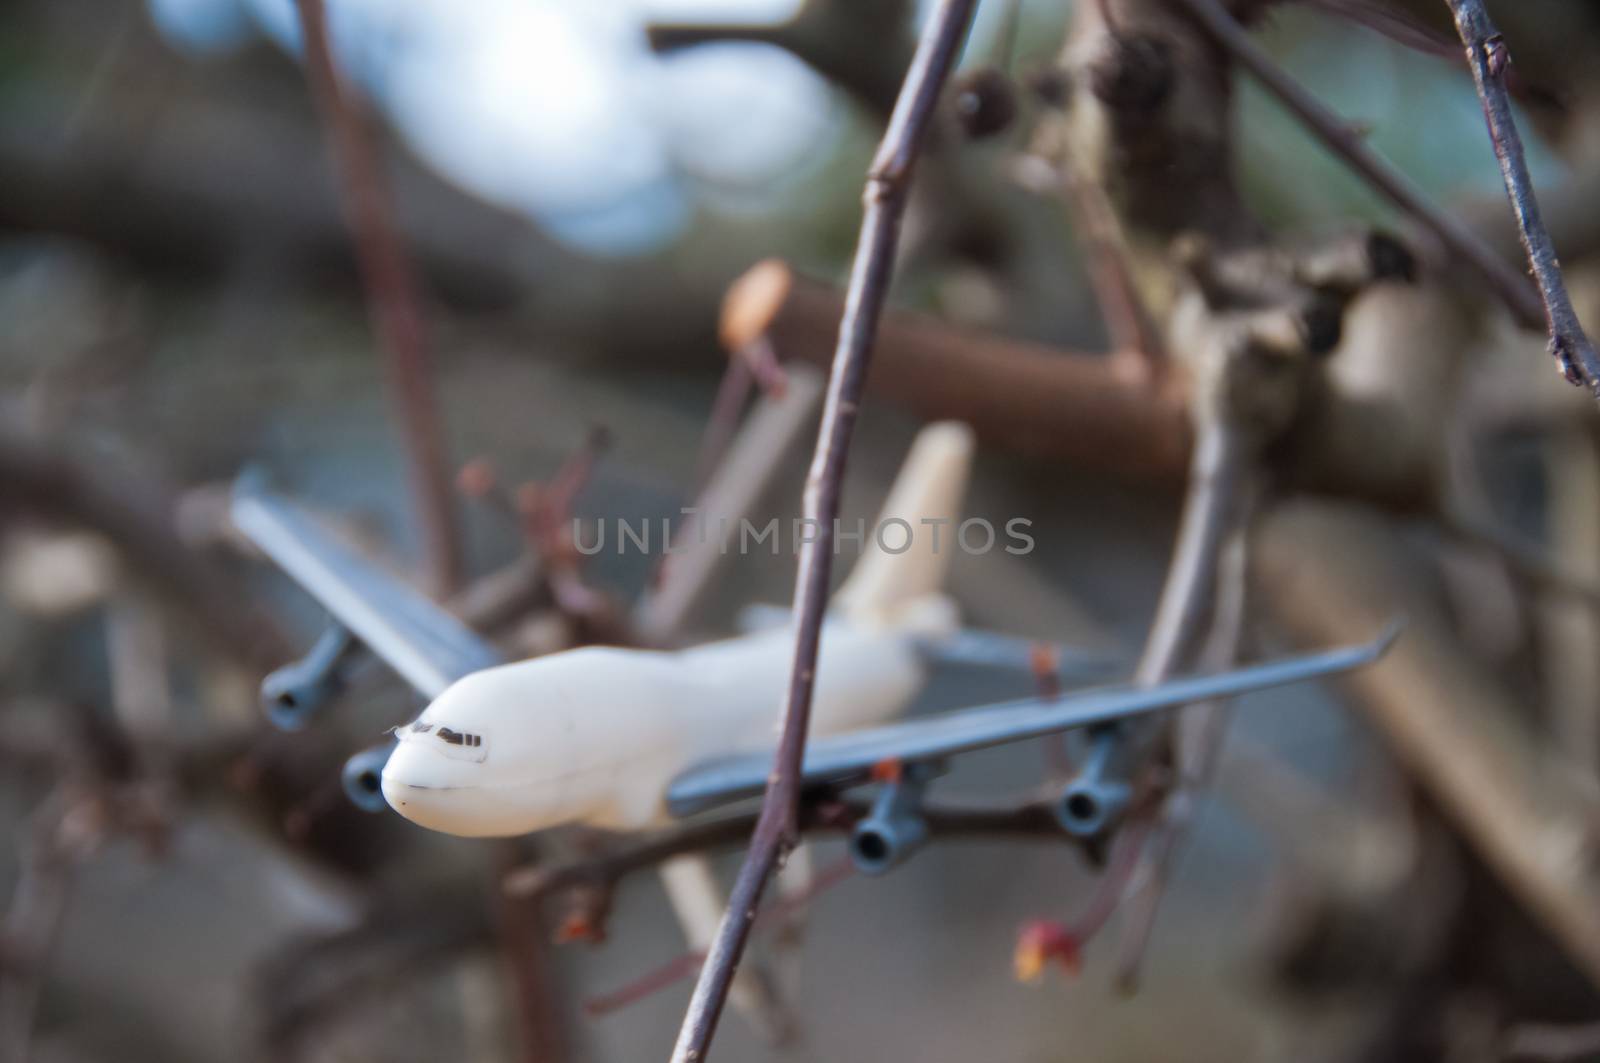 Model toy plane close-up in a forest by eyeofpaul